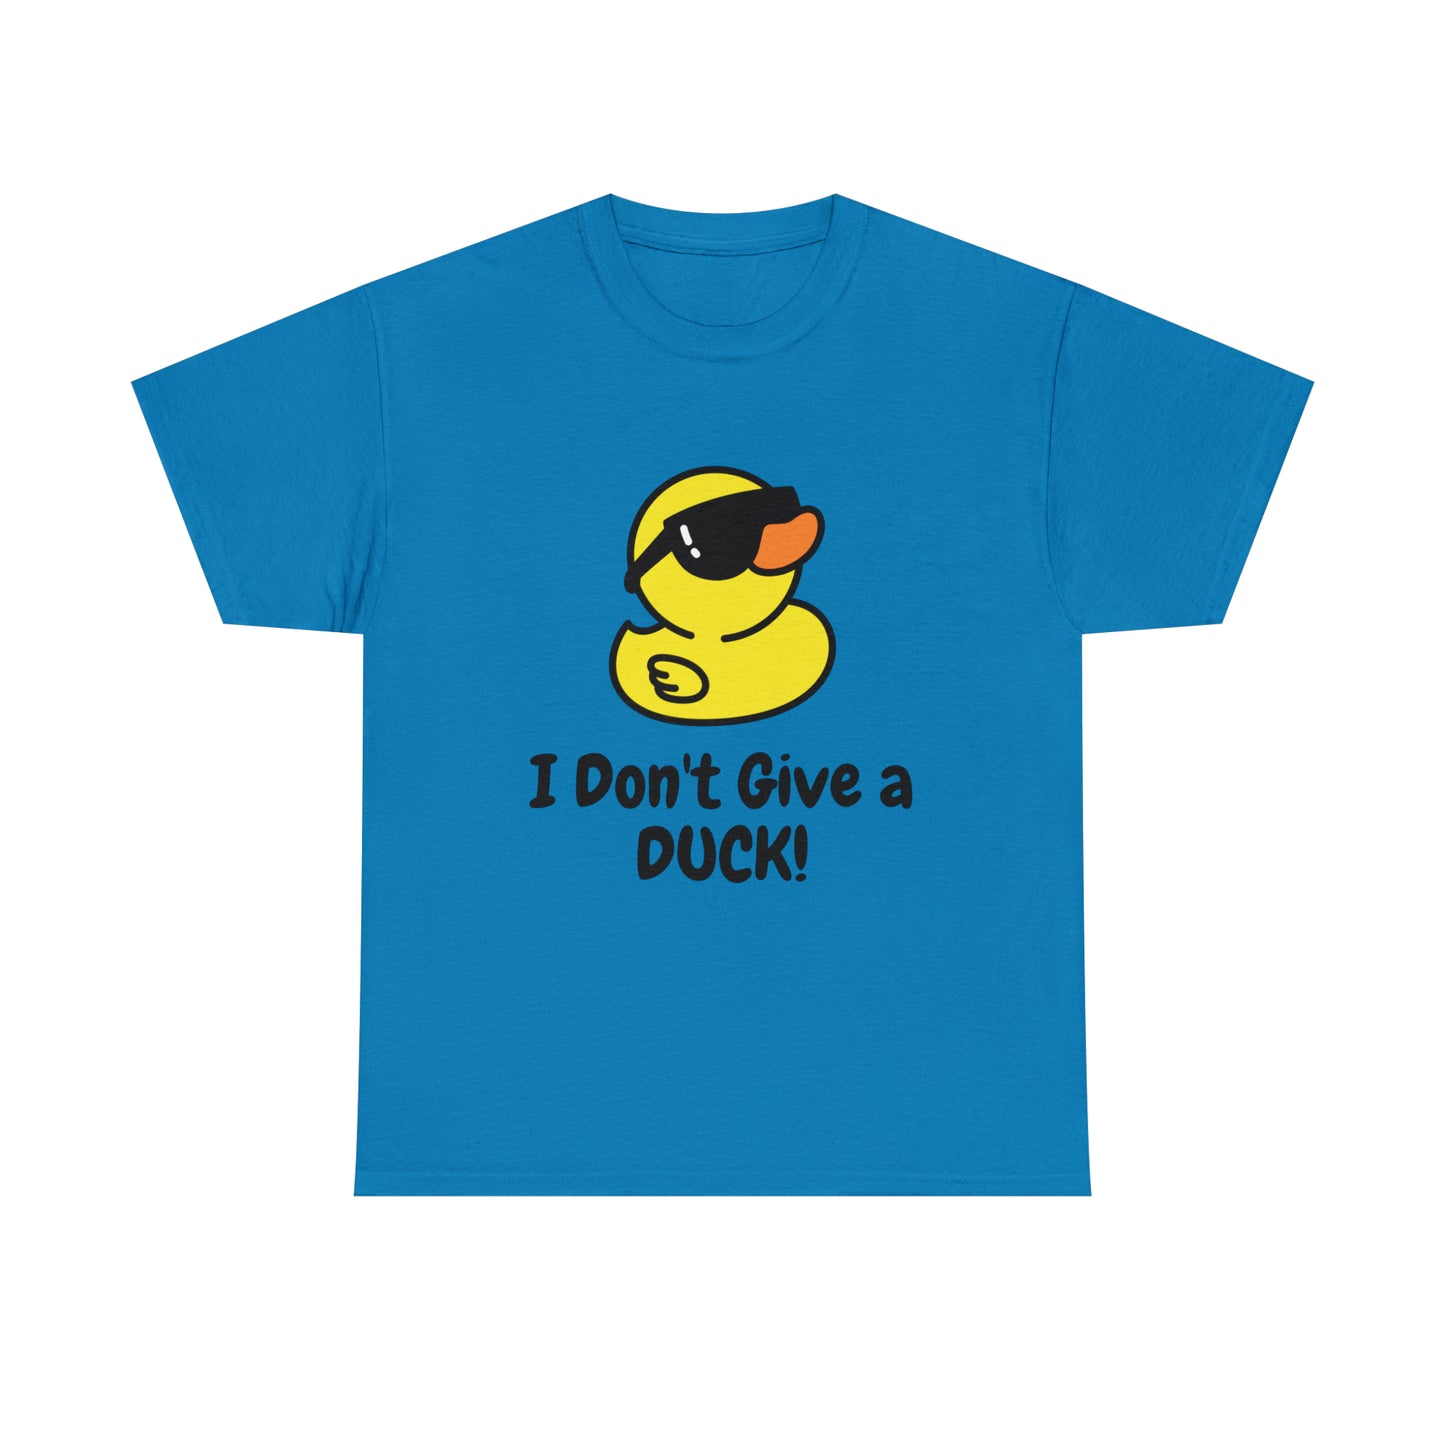 "I Don't Give a DUCK!" Unisex Heavy Cotton Tee